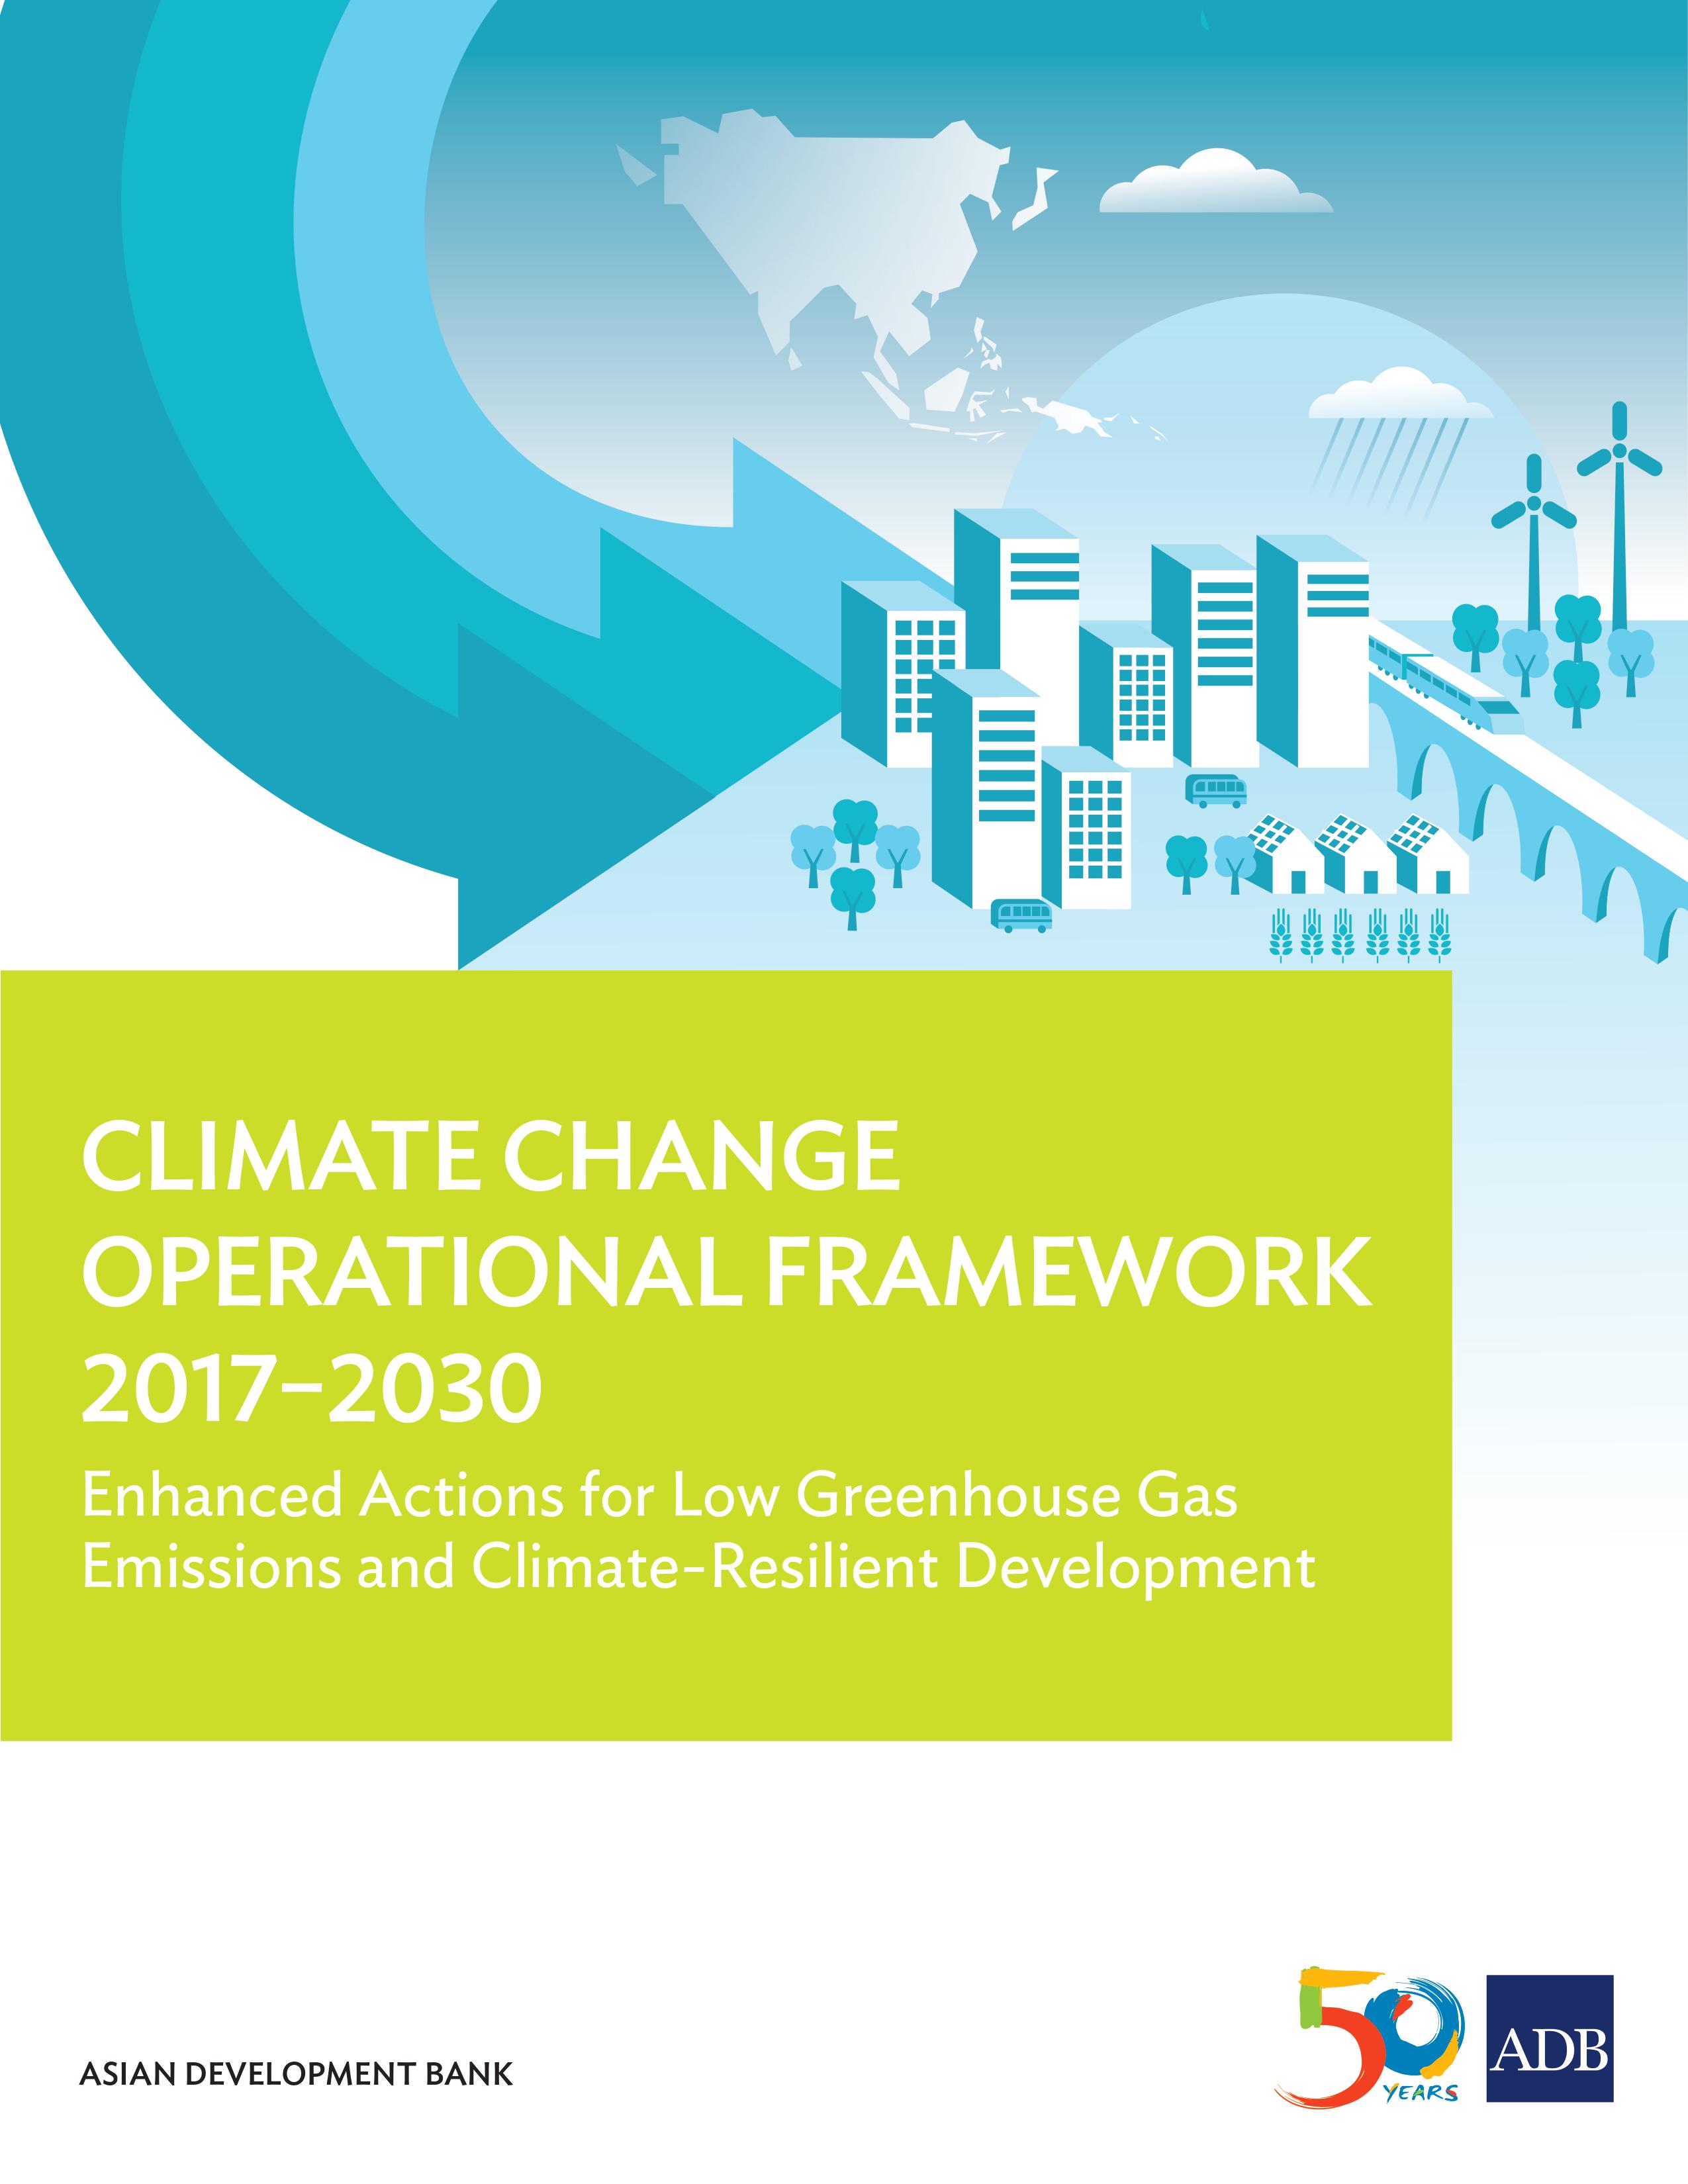 ADB’s Approach to the Climate Change Challenge